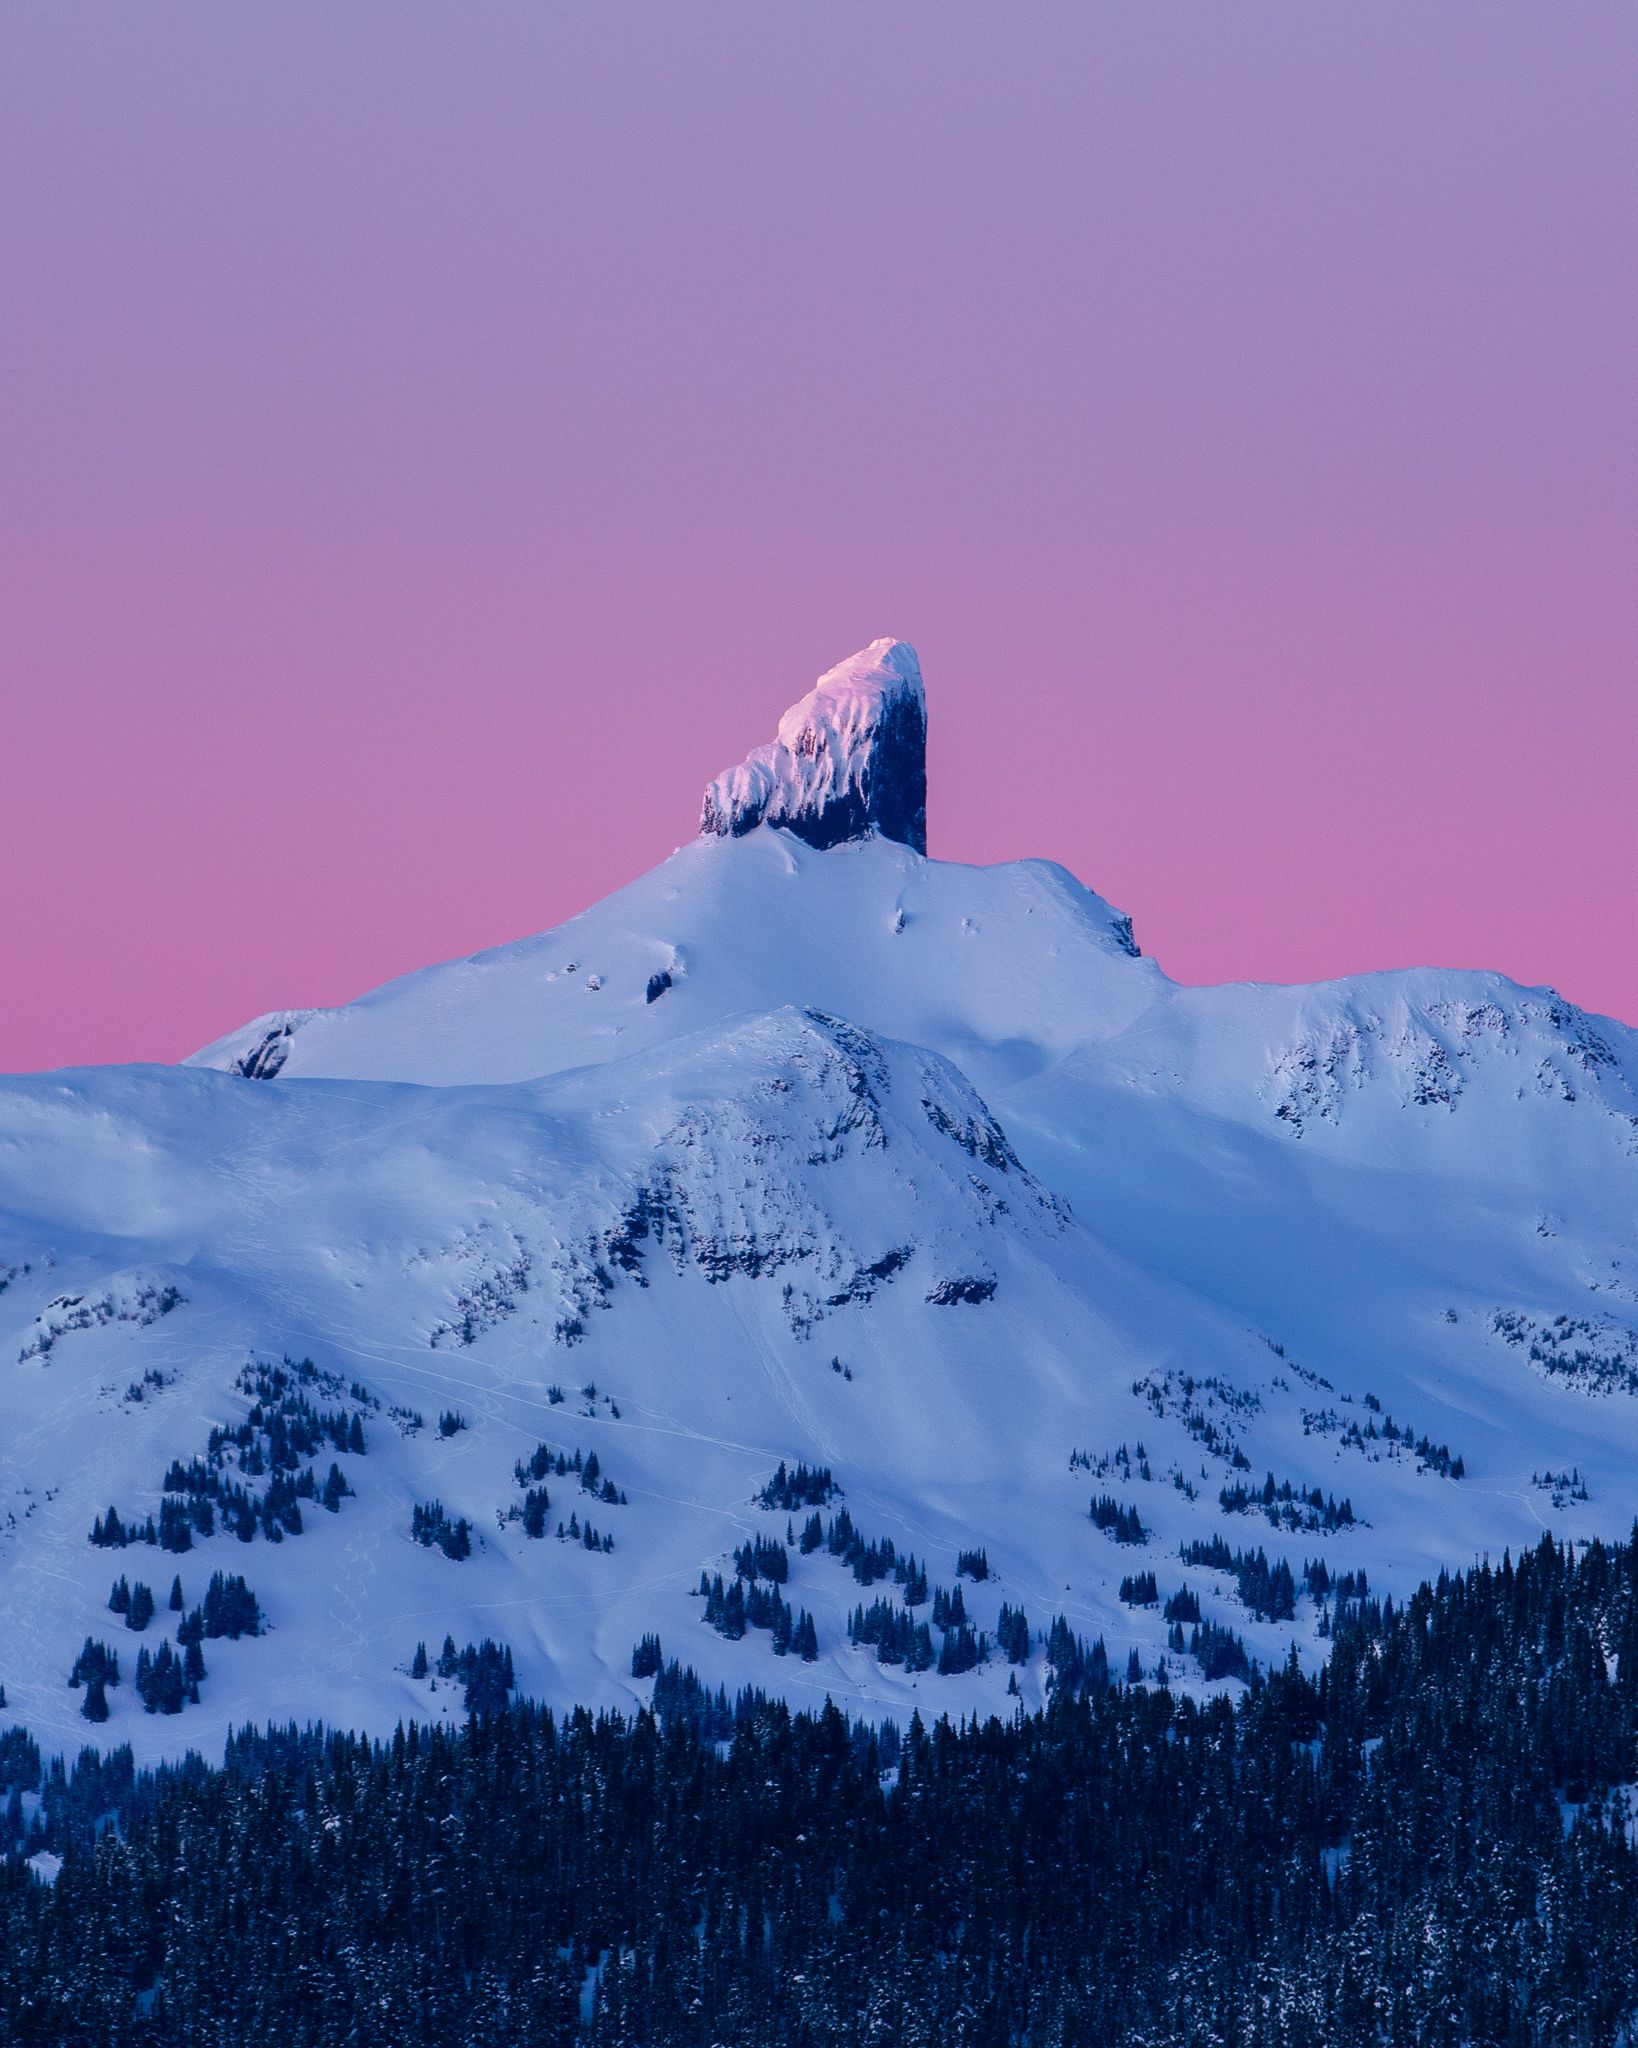 Winter hues in the Squamish backcountry